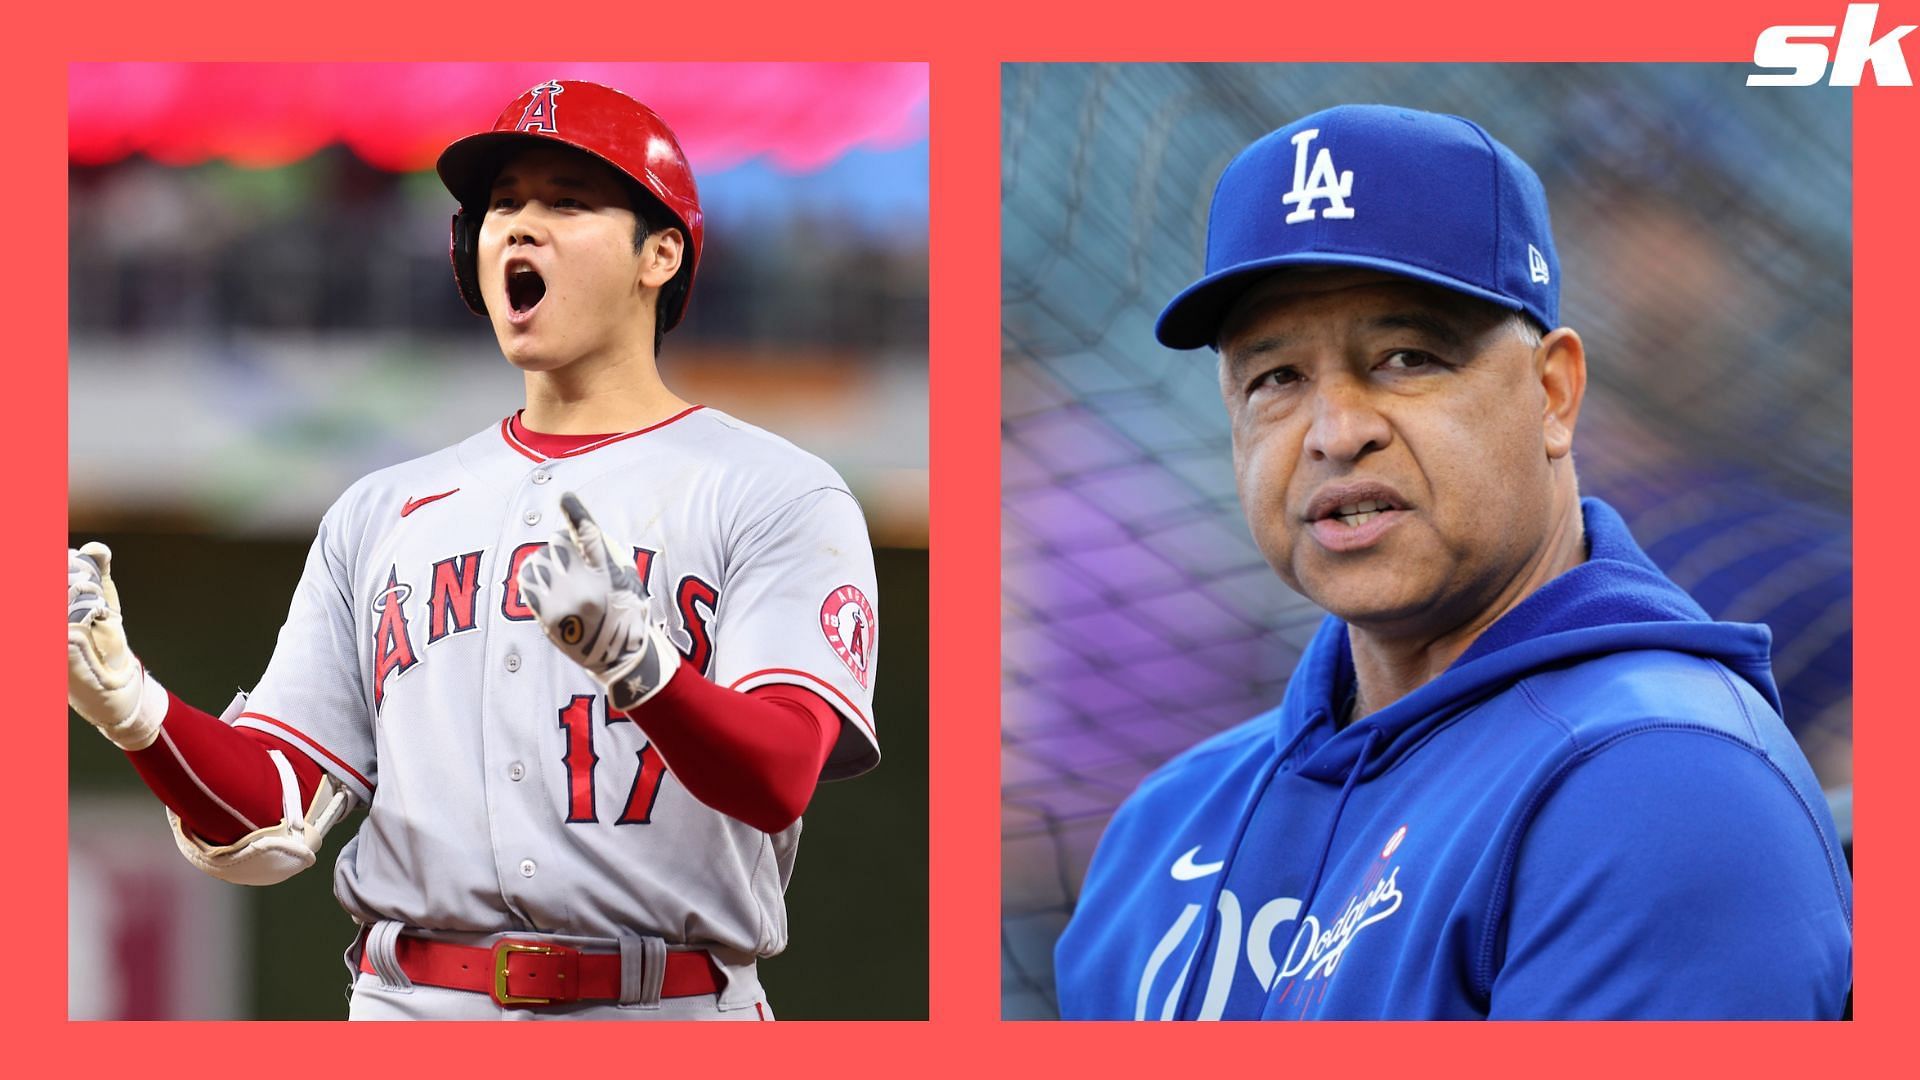 Shohei Ohtani of the Los Angeles Angels and Dave Roberts of the Los Angeles Dodgers